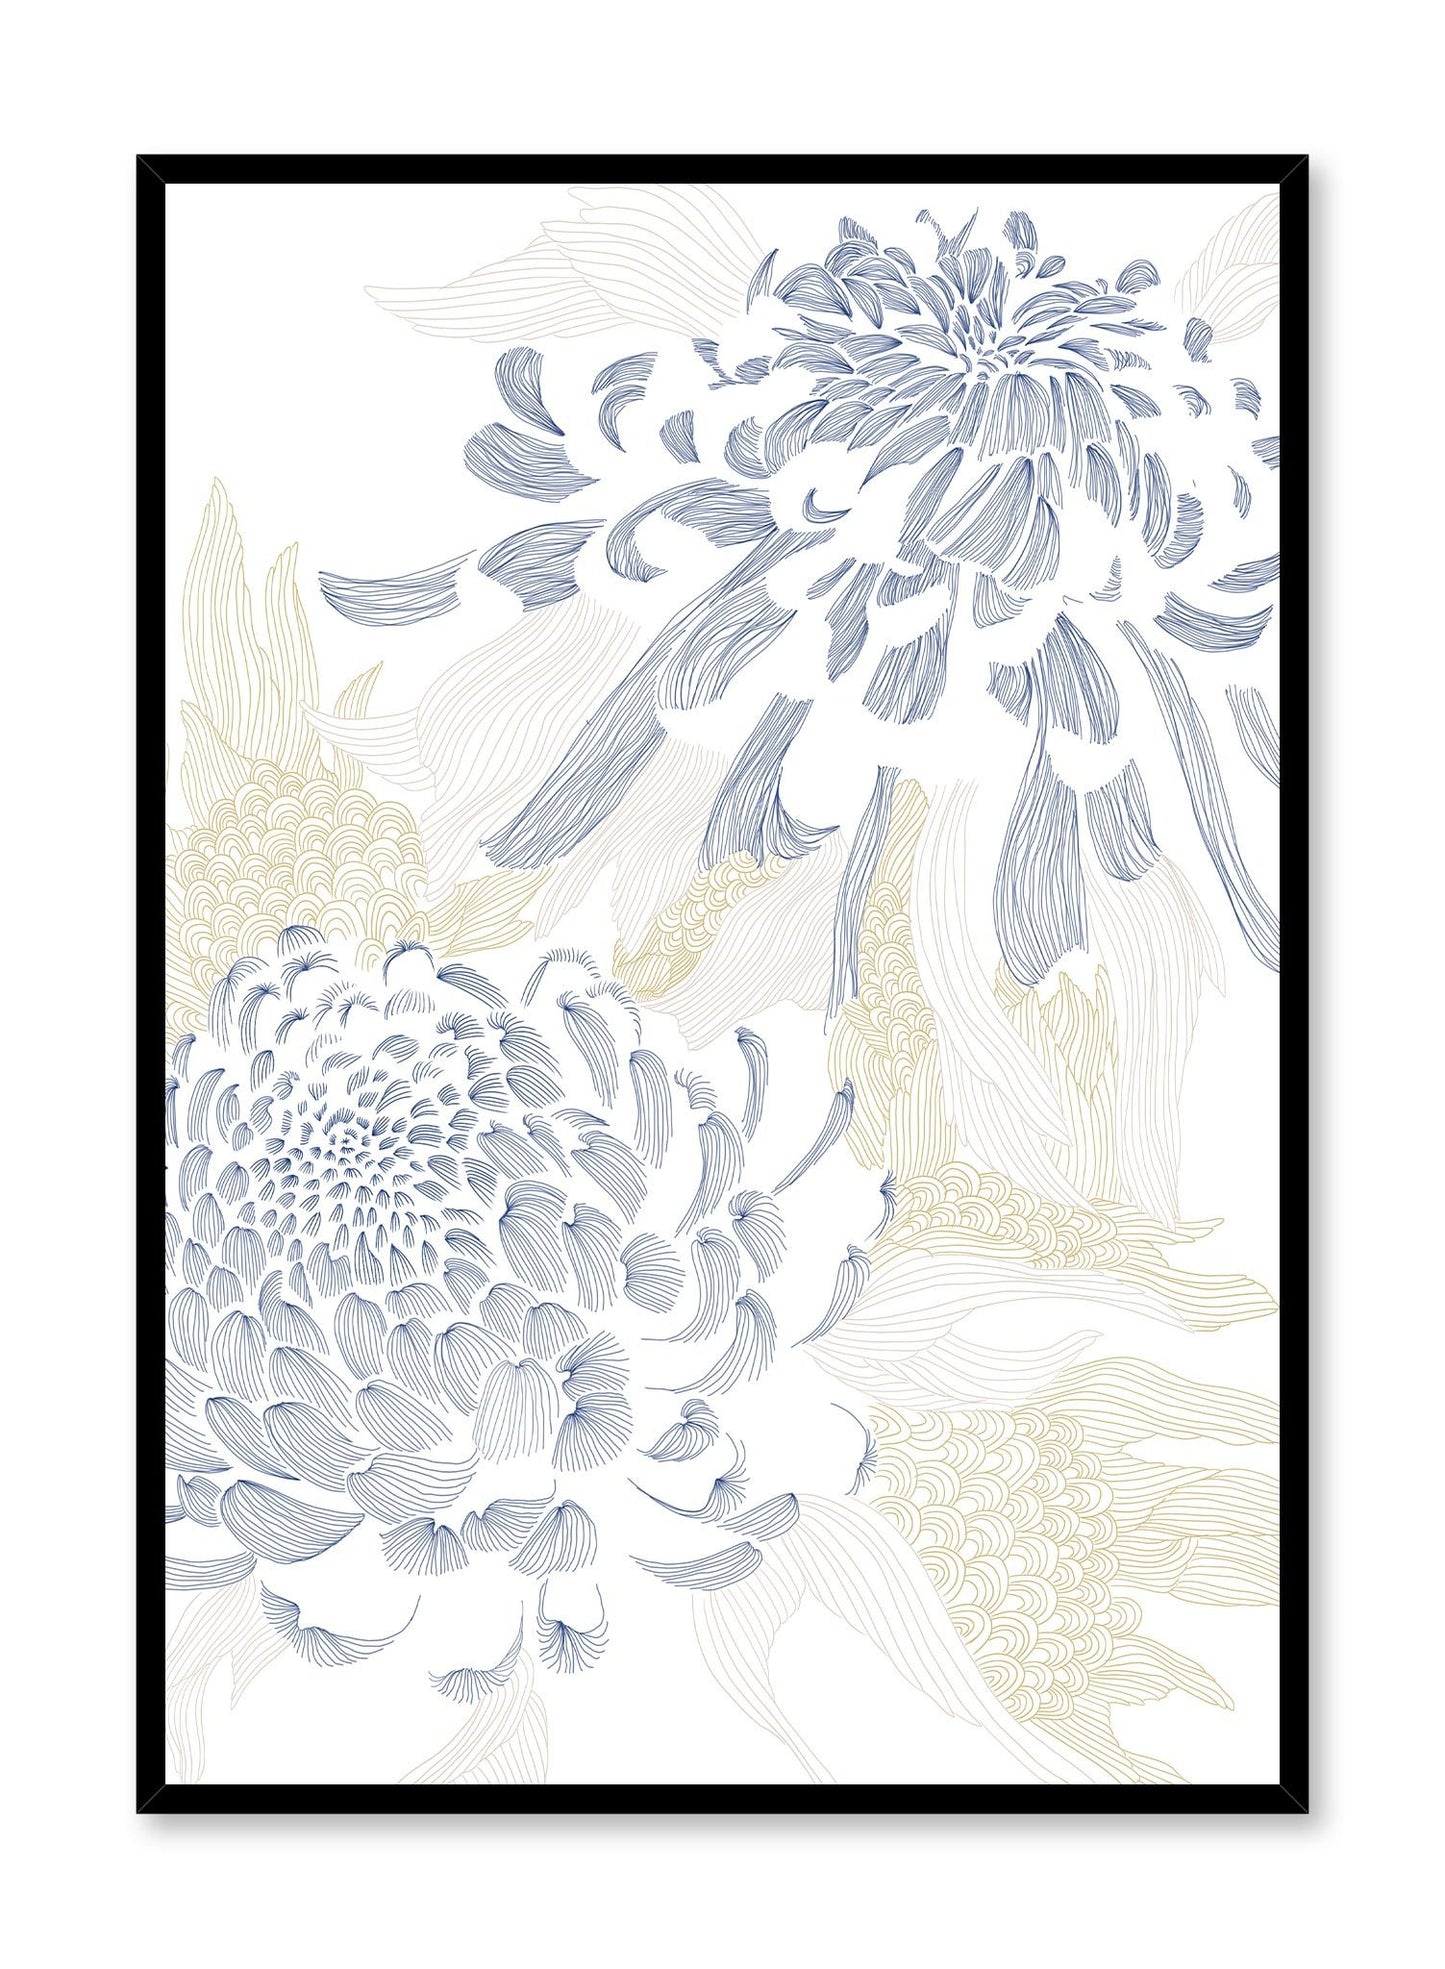 Hanakotoba is a minimalist illustration by Opposite Wall of big blooming blue and beige flowers.